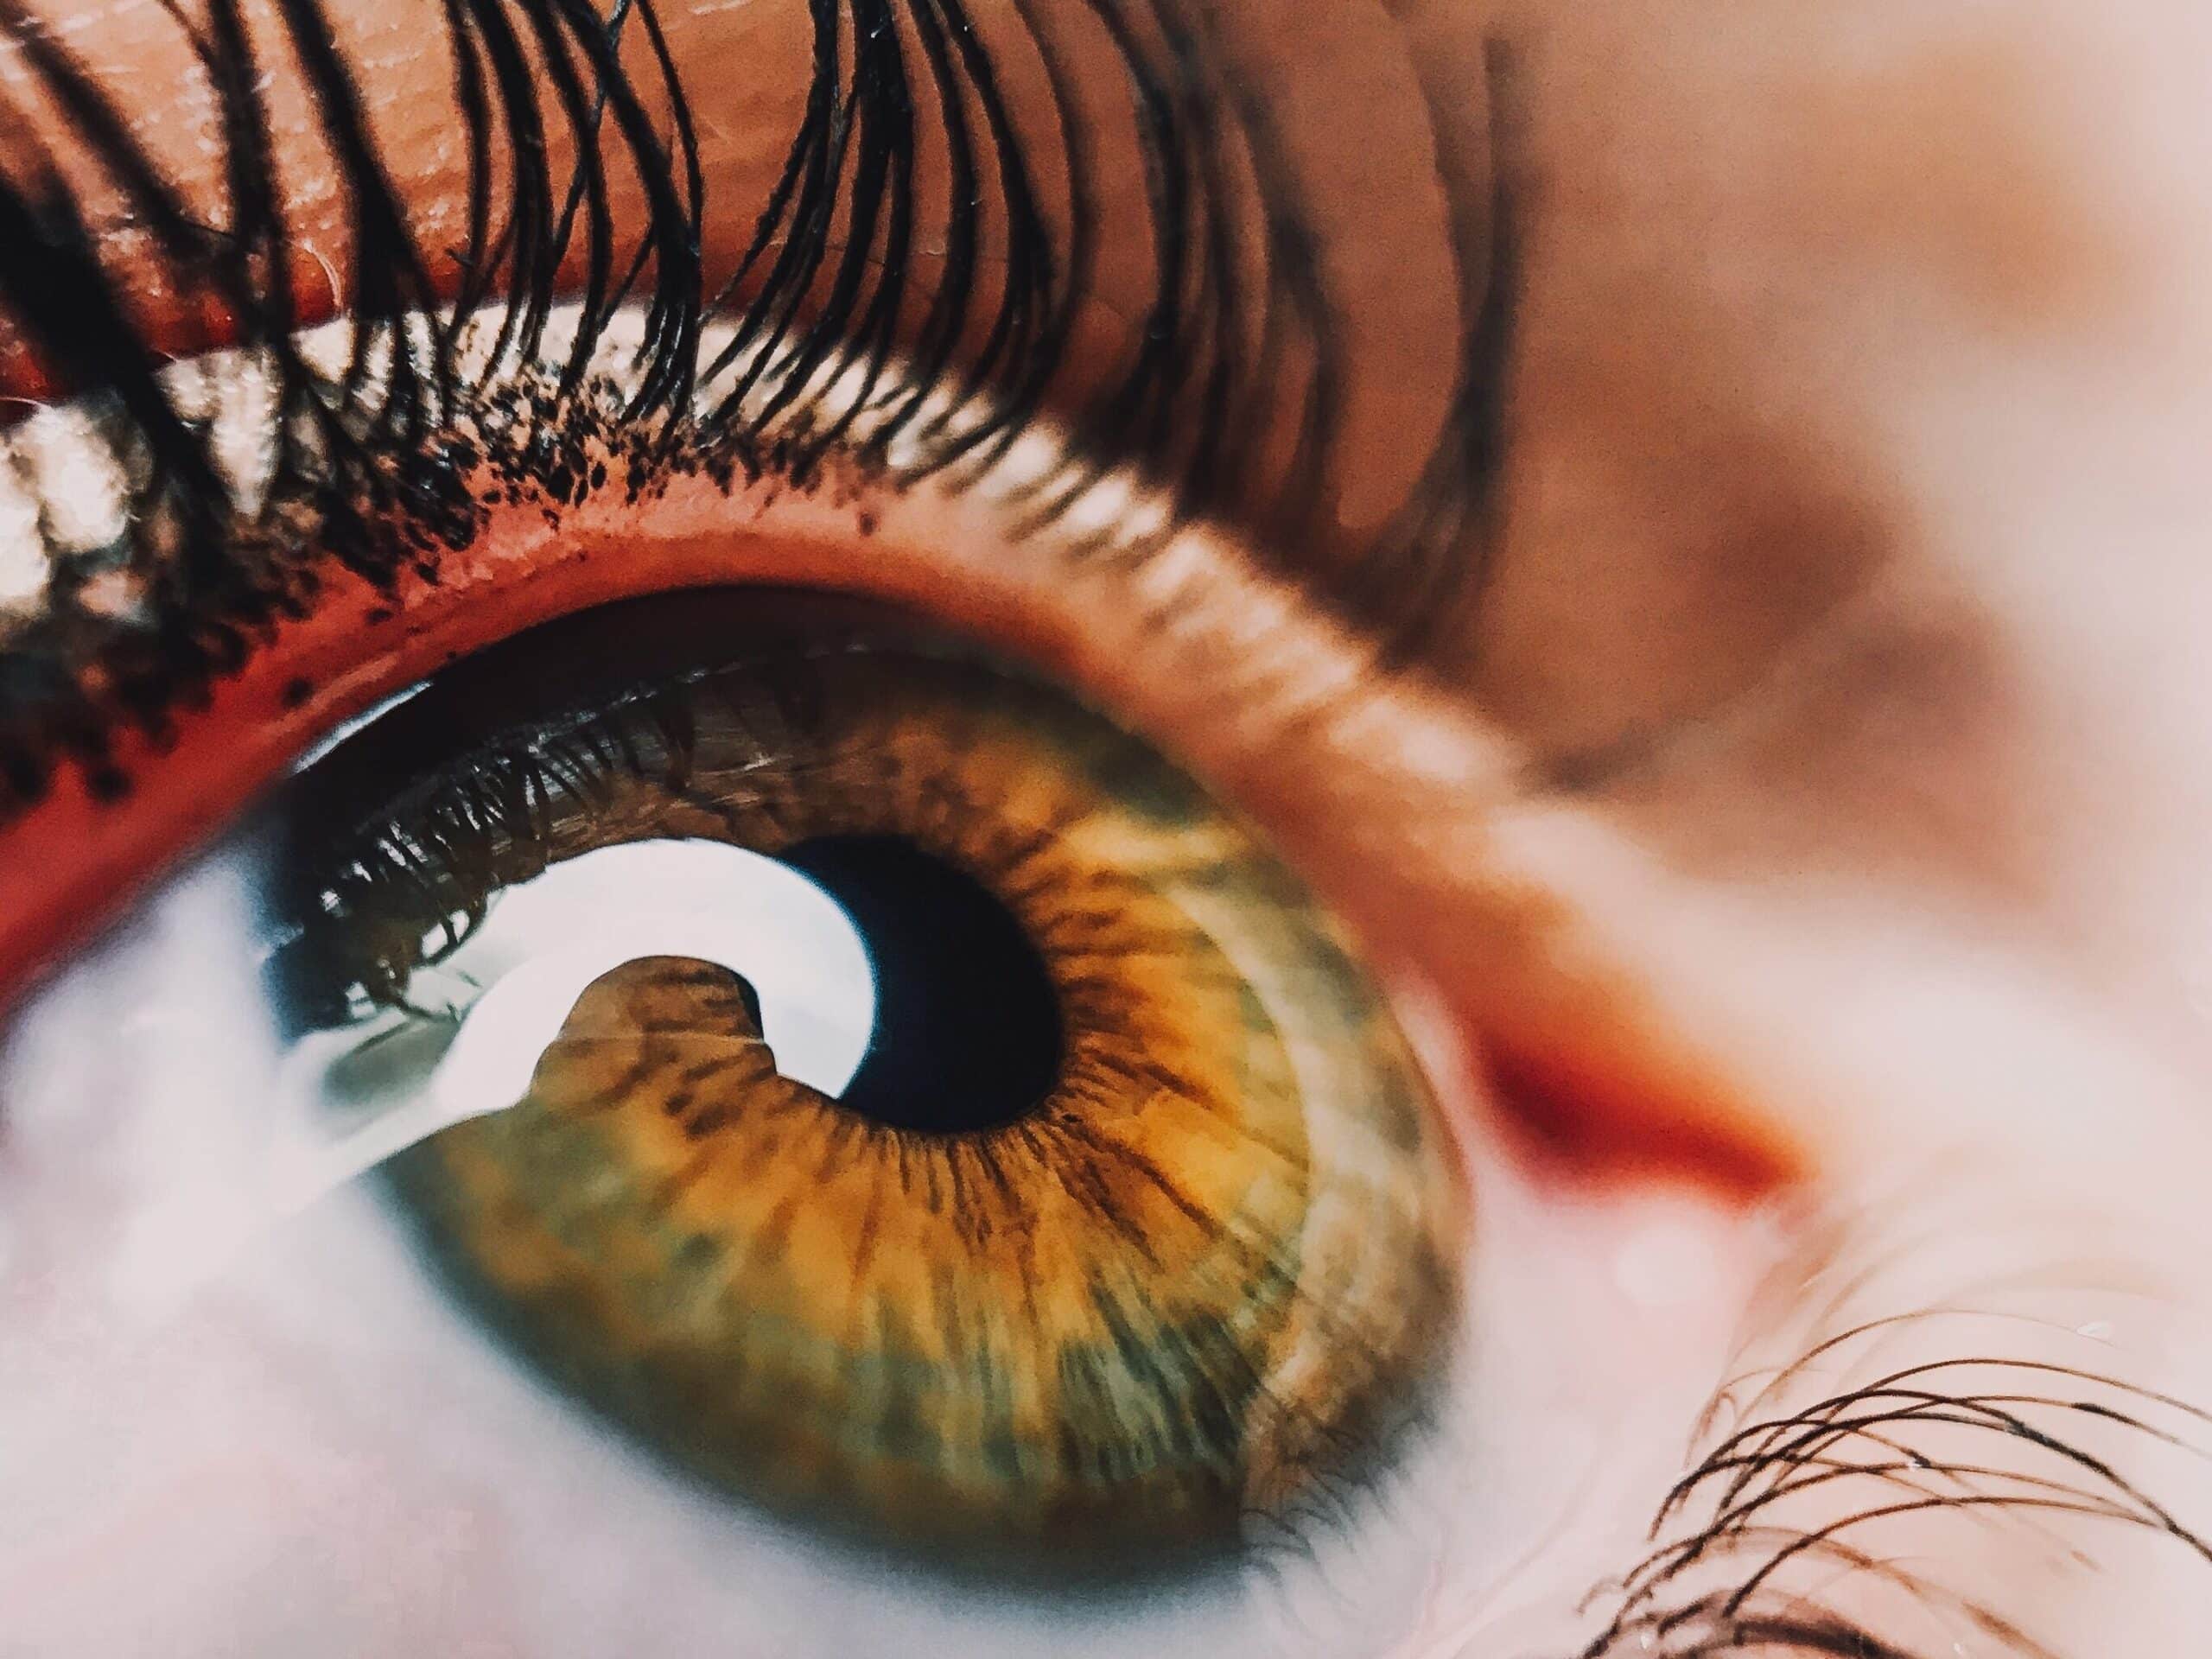 Close-up image of an eye prompts comparison between human and computer vision.
